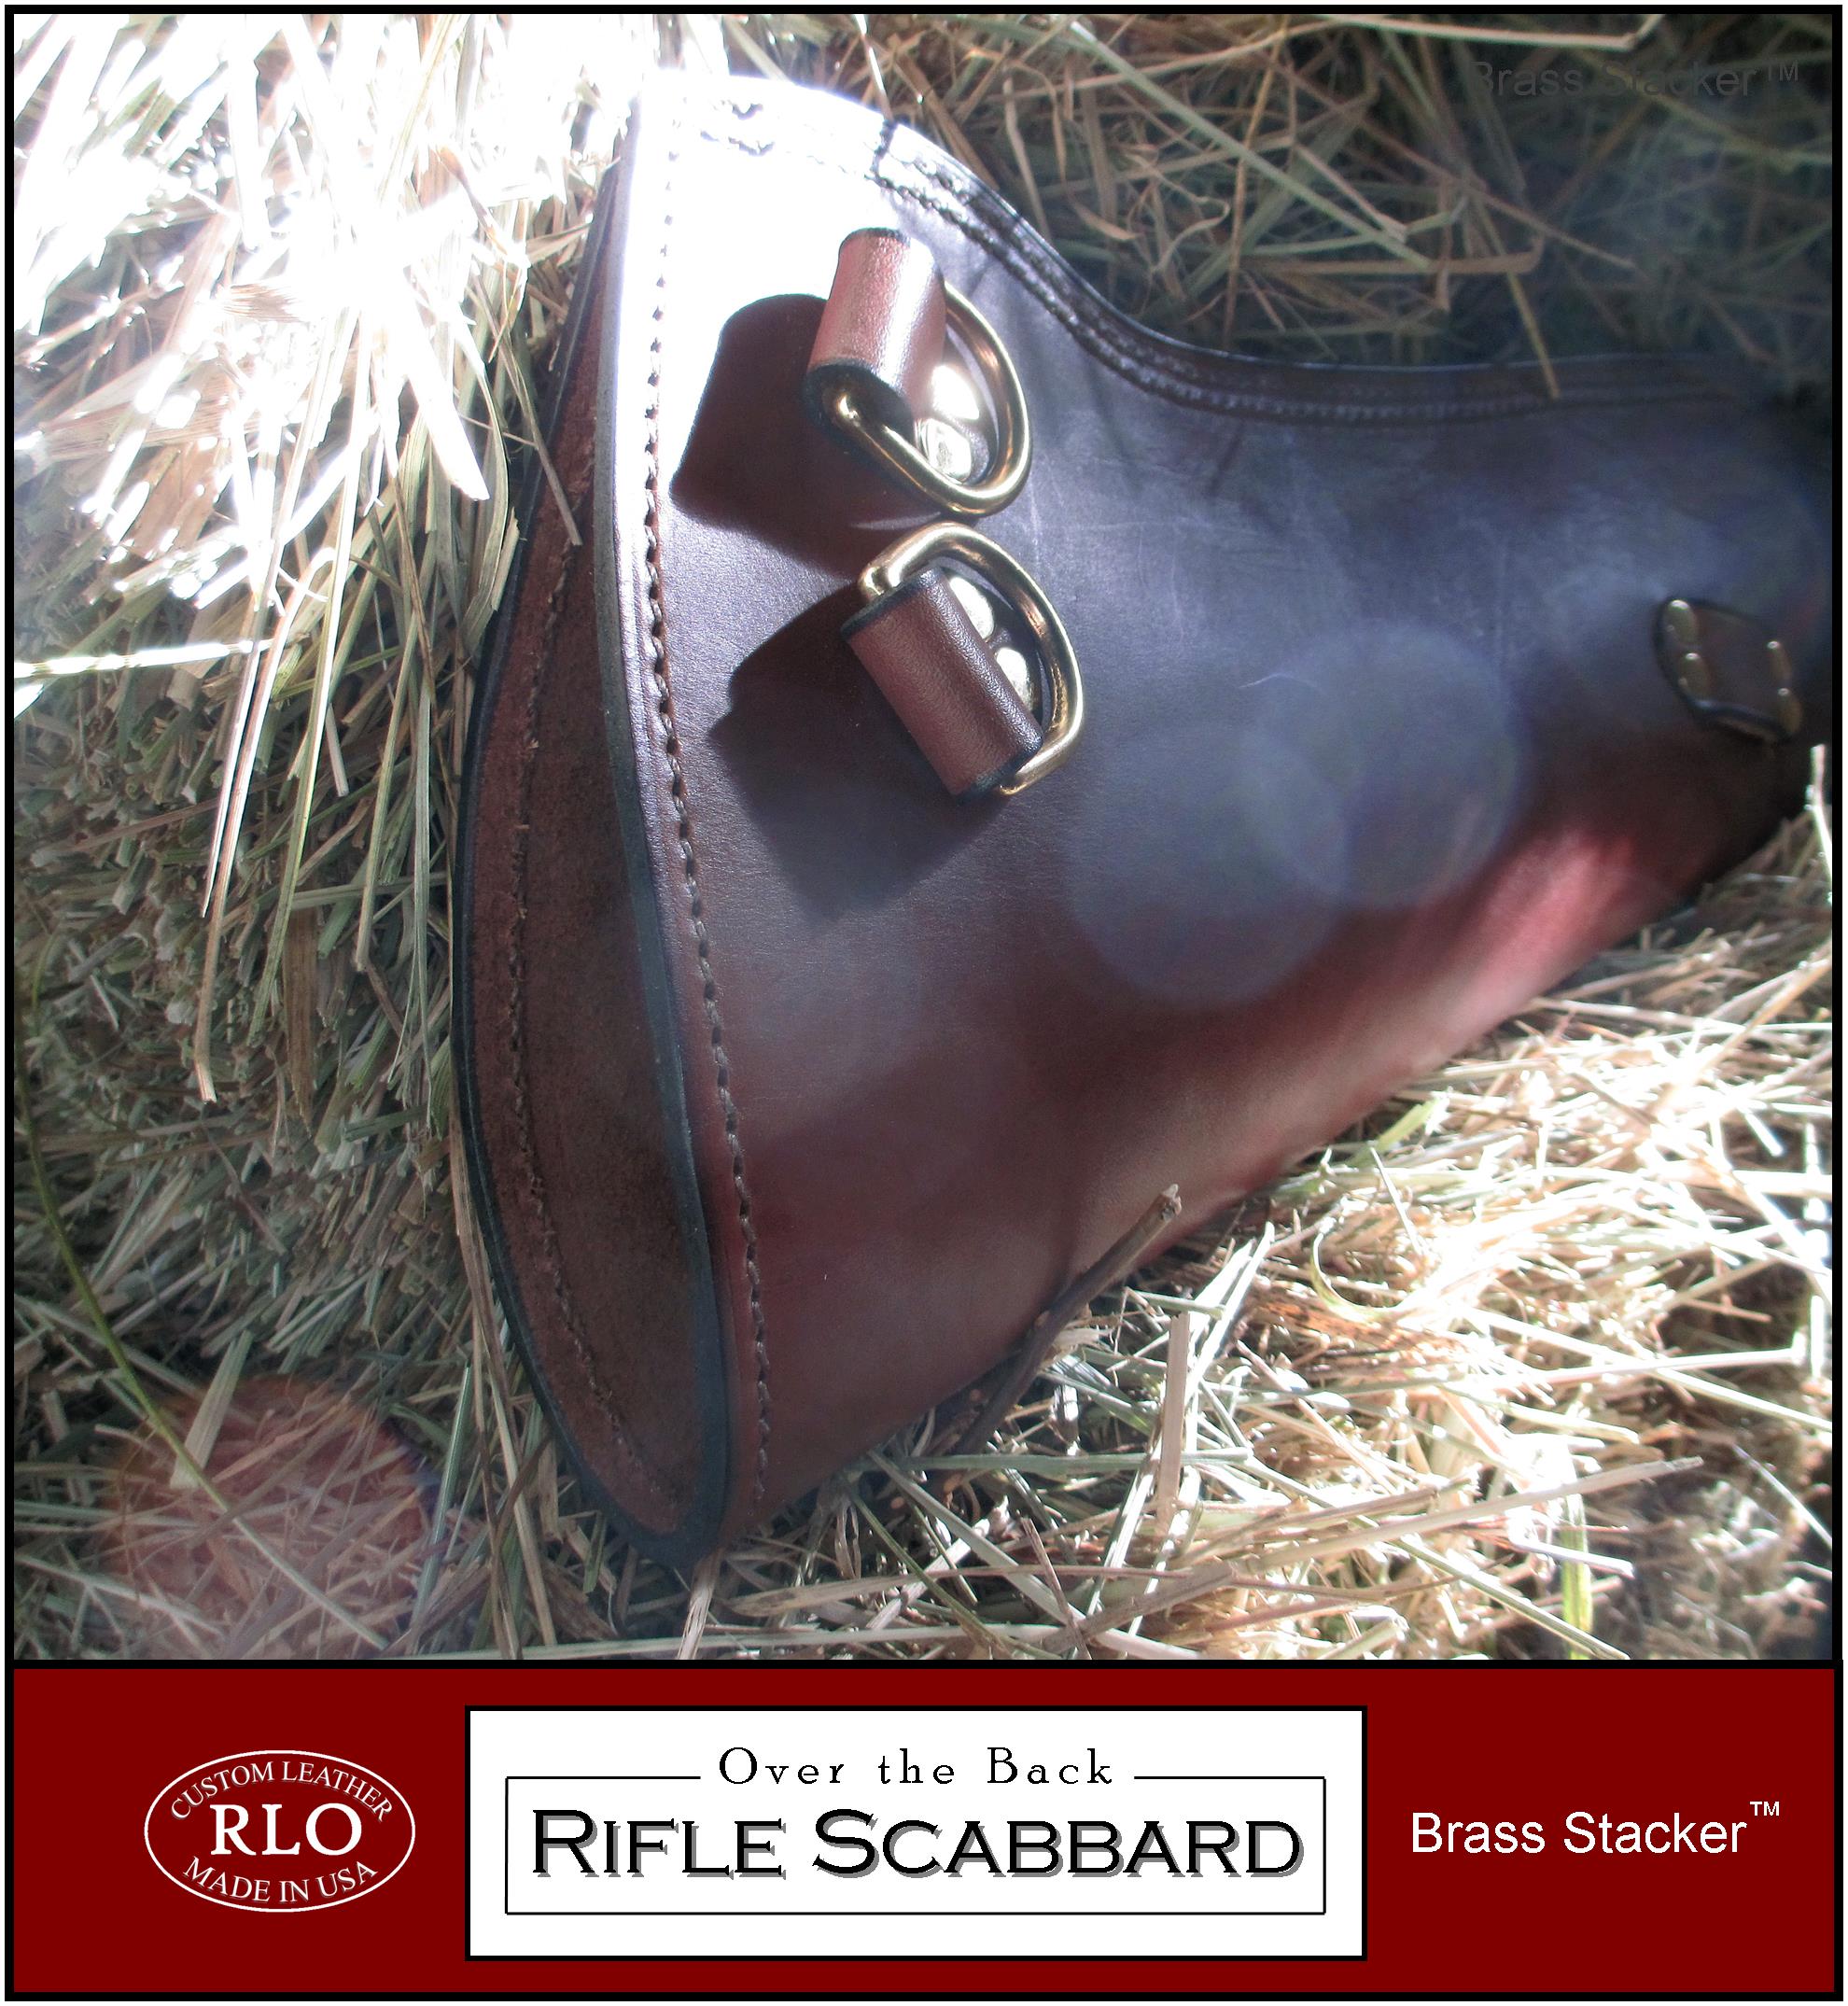 Brass Stacker™ RLO Over the Back Rifle Scabbard